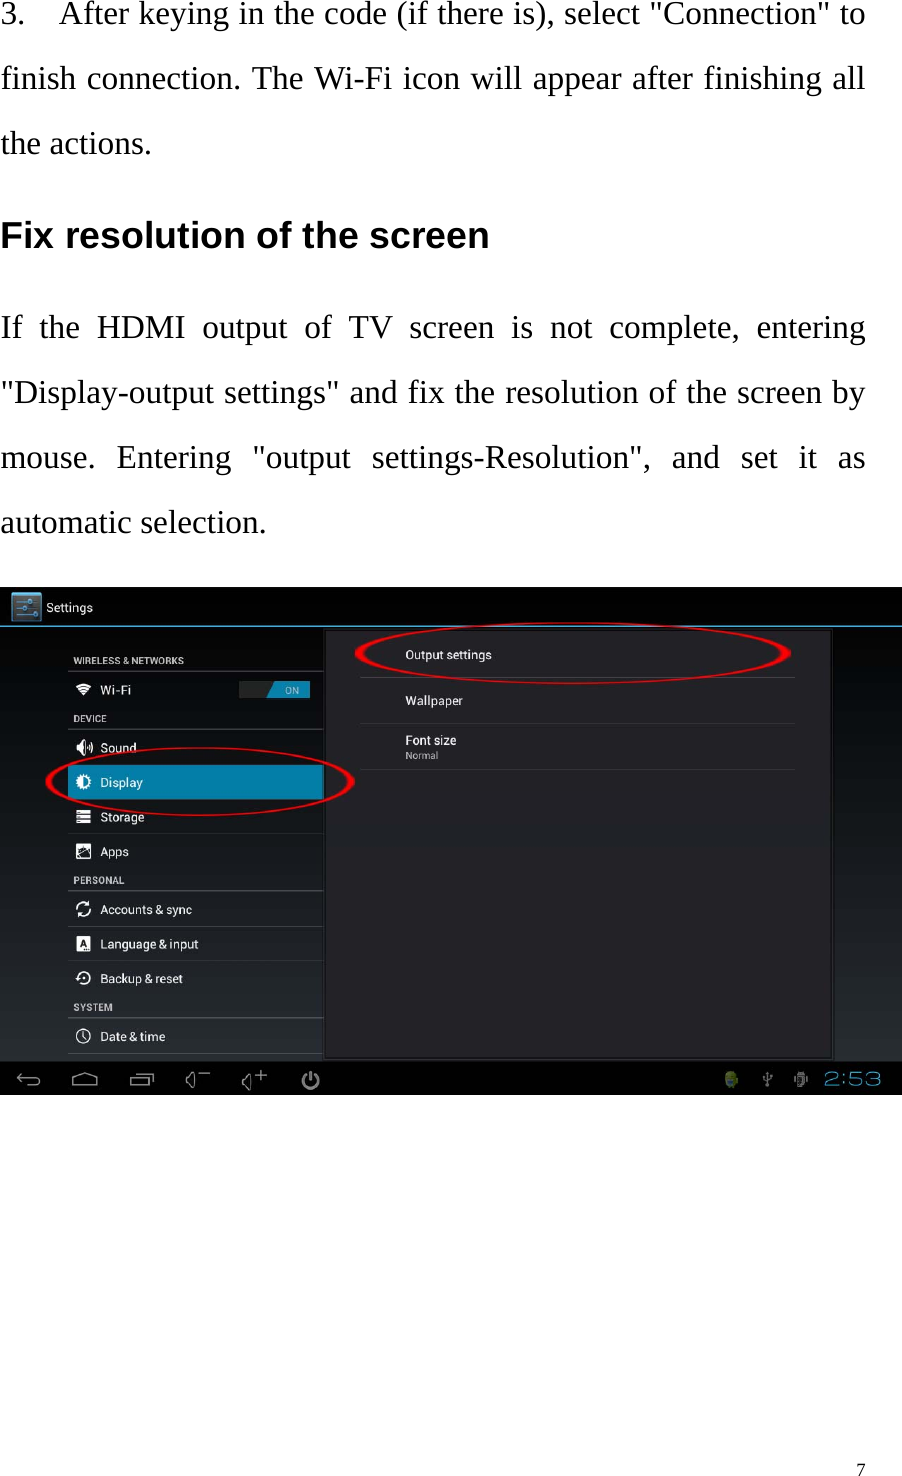    73.    After keying in the code (if there is), select &quot;Connection&quot; to finish connection. The Wi-Fi icon will appear after finishing all the actions. Fix resolution of the screen   If the HDMI output of TV screen is not complete, entering &quot;Display-output settings&quot; and fix the resolution of the screen by mouse. Entering &quot;output settings-Resolution&quot;, and set it as automatic selection.   